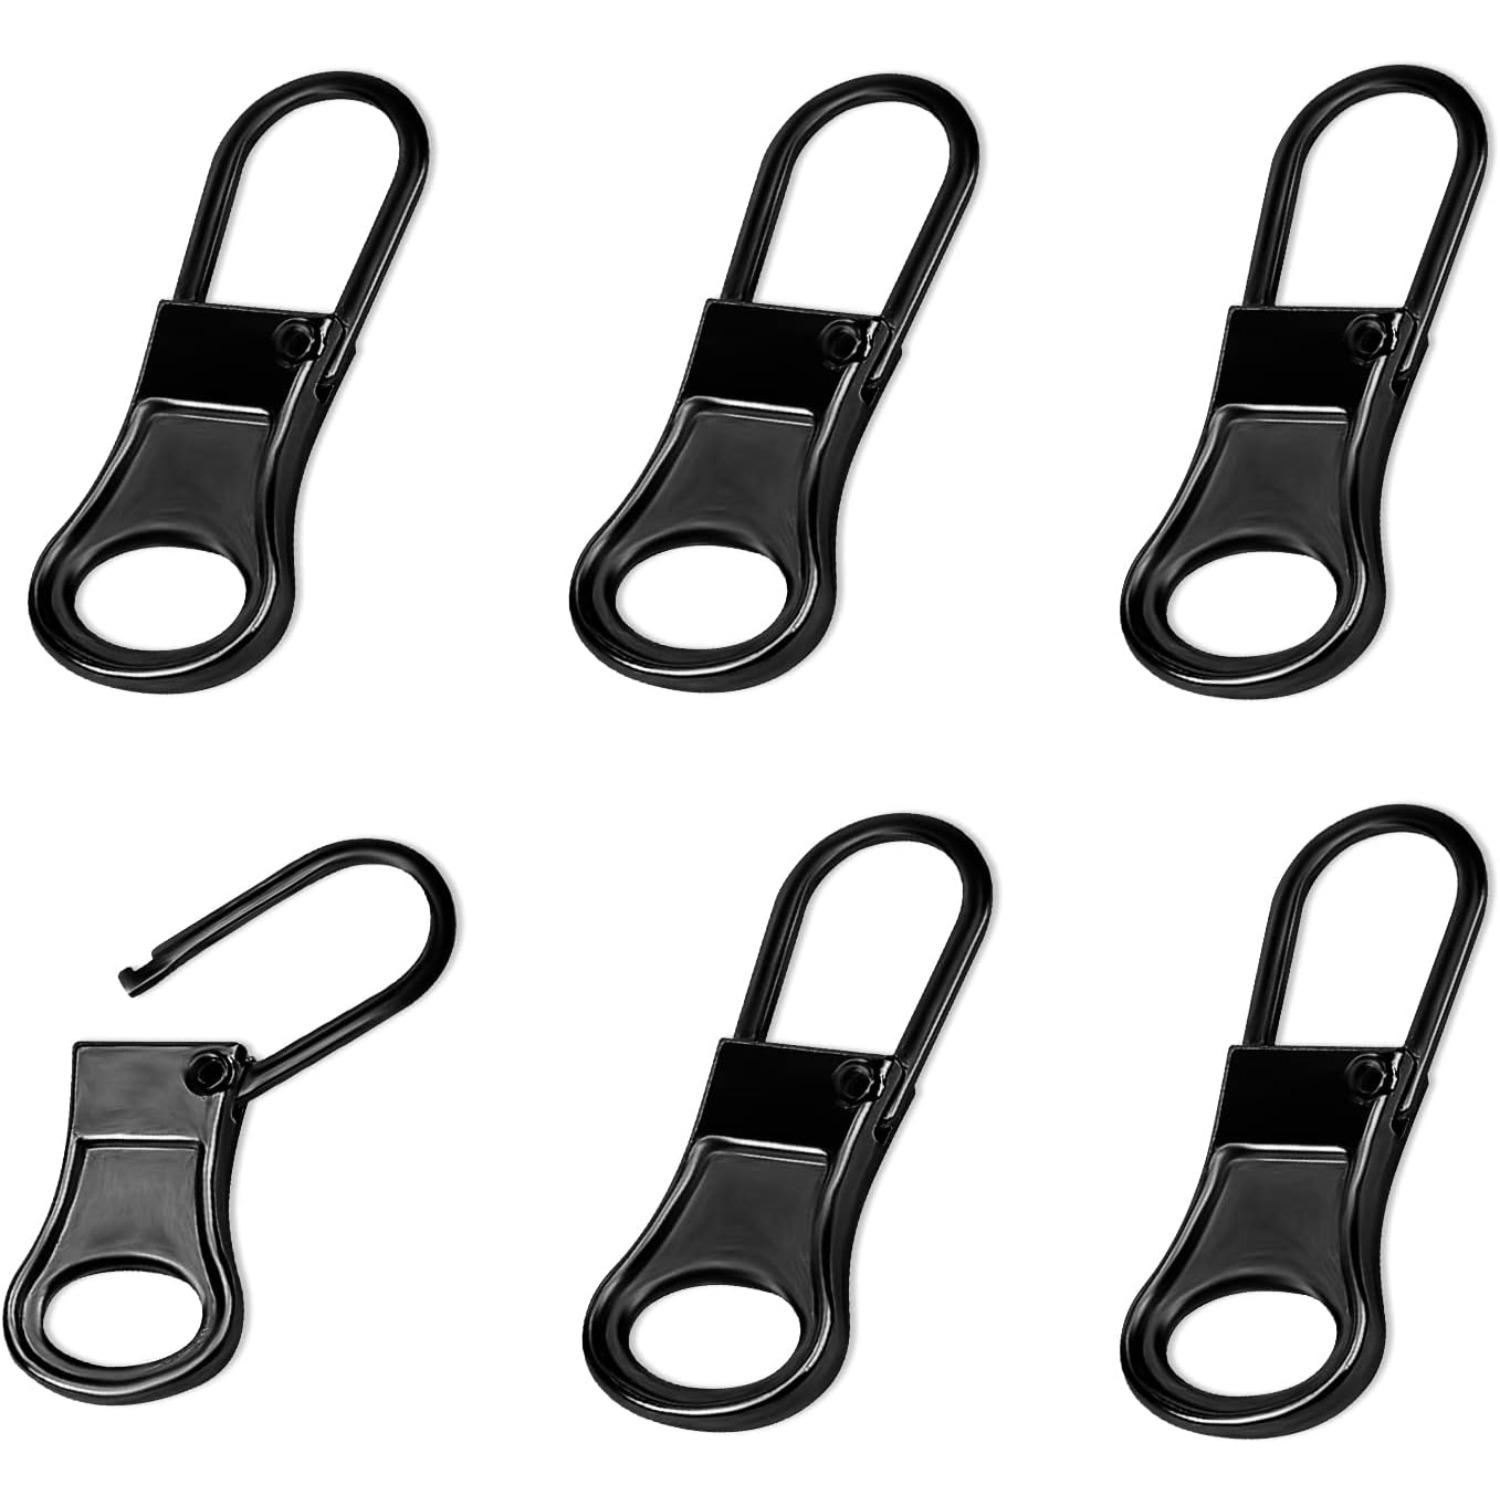 2Pcs Universal Fix Zipper Puller Repair Kit Replacement Zippers Head Buckle  For Jackets Clothes Backpacks